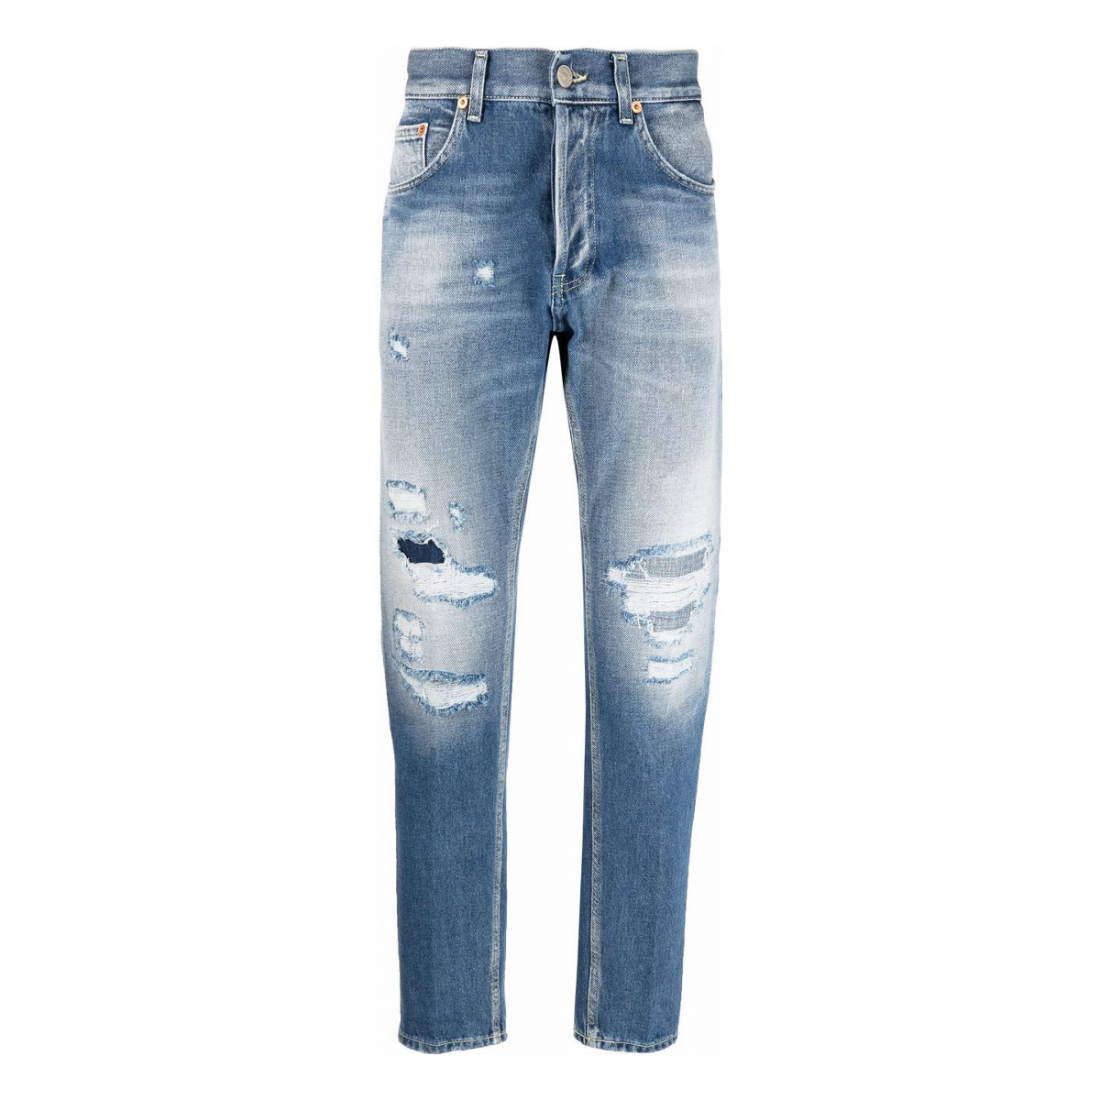 Men's 'Distressed Effect' Jeans